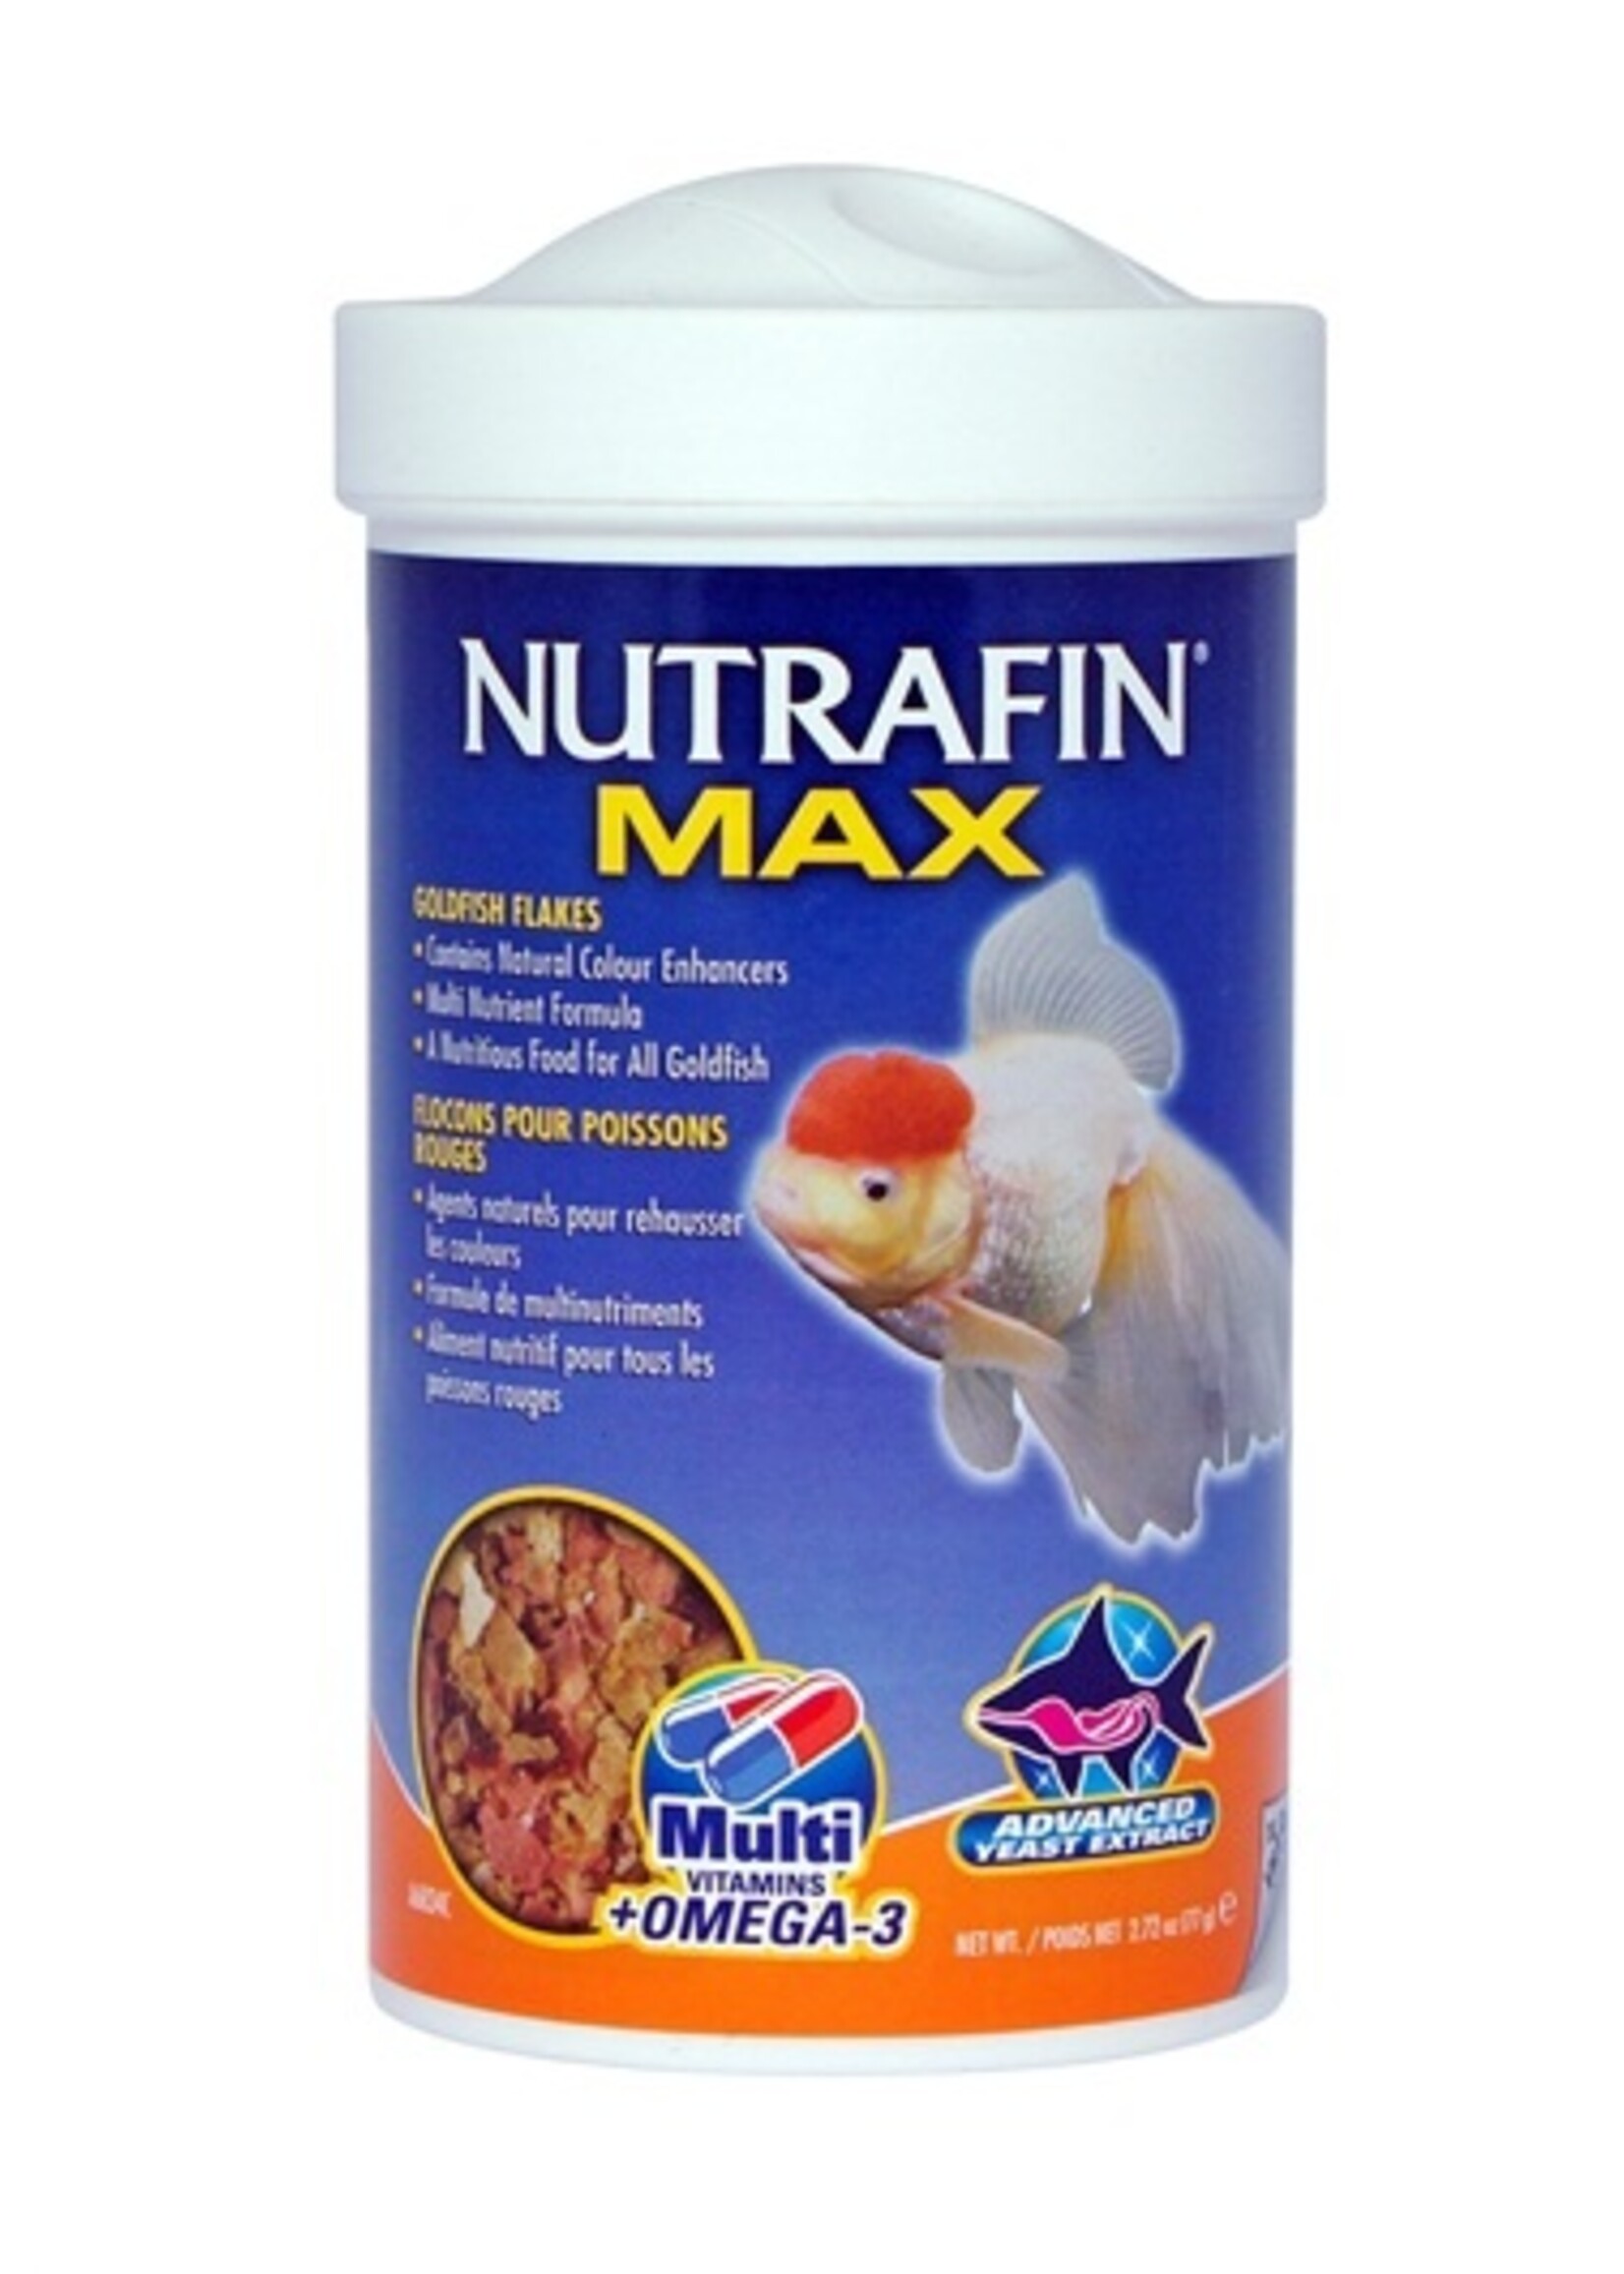 Nutrafin Nutrafin Max Goldfish Flakes